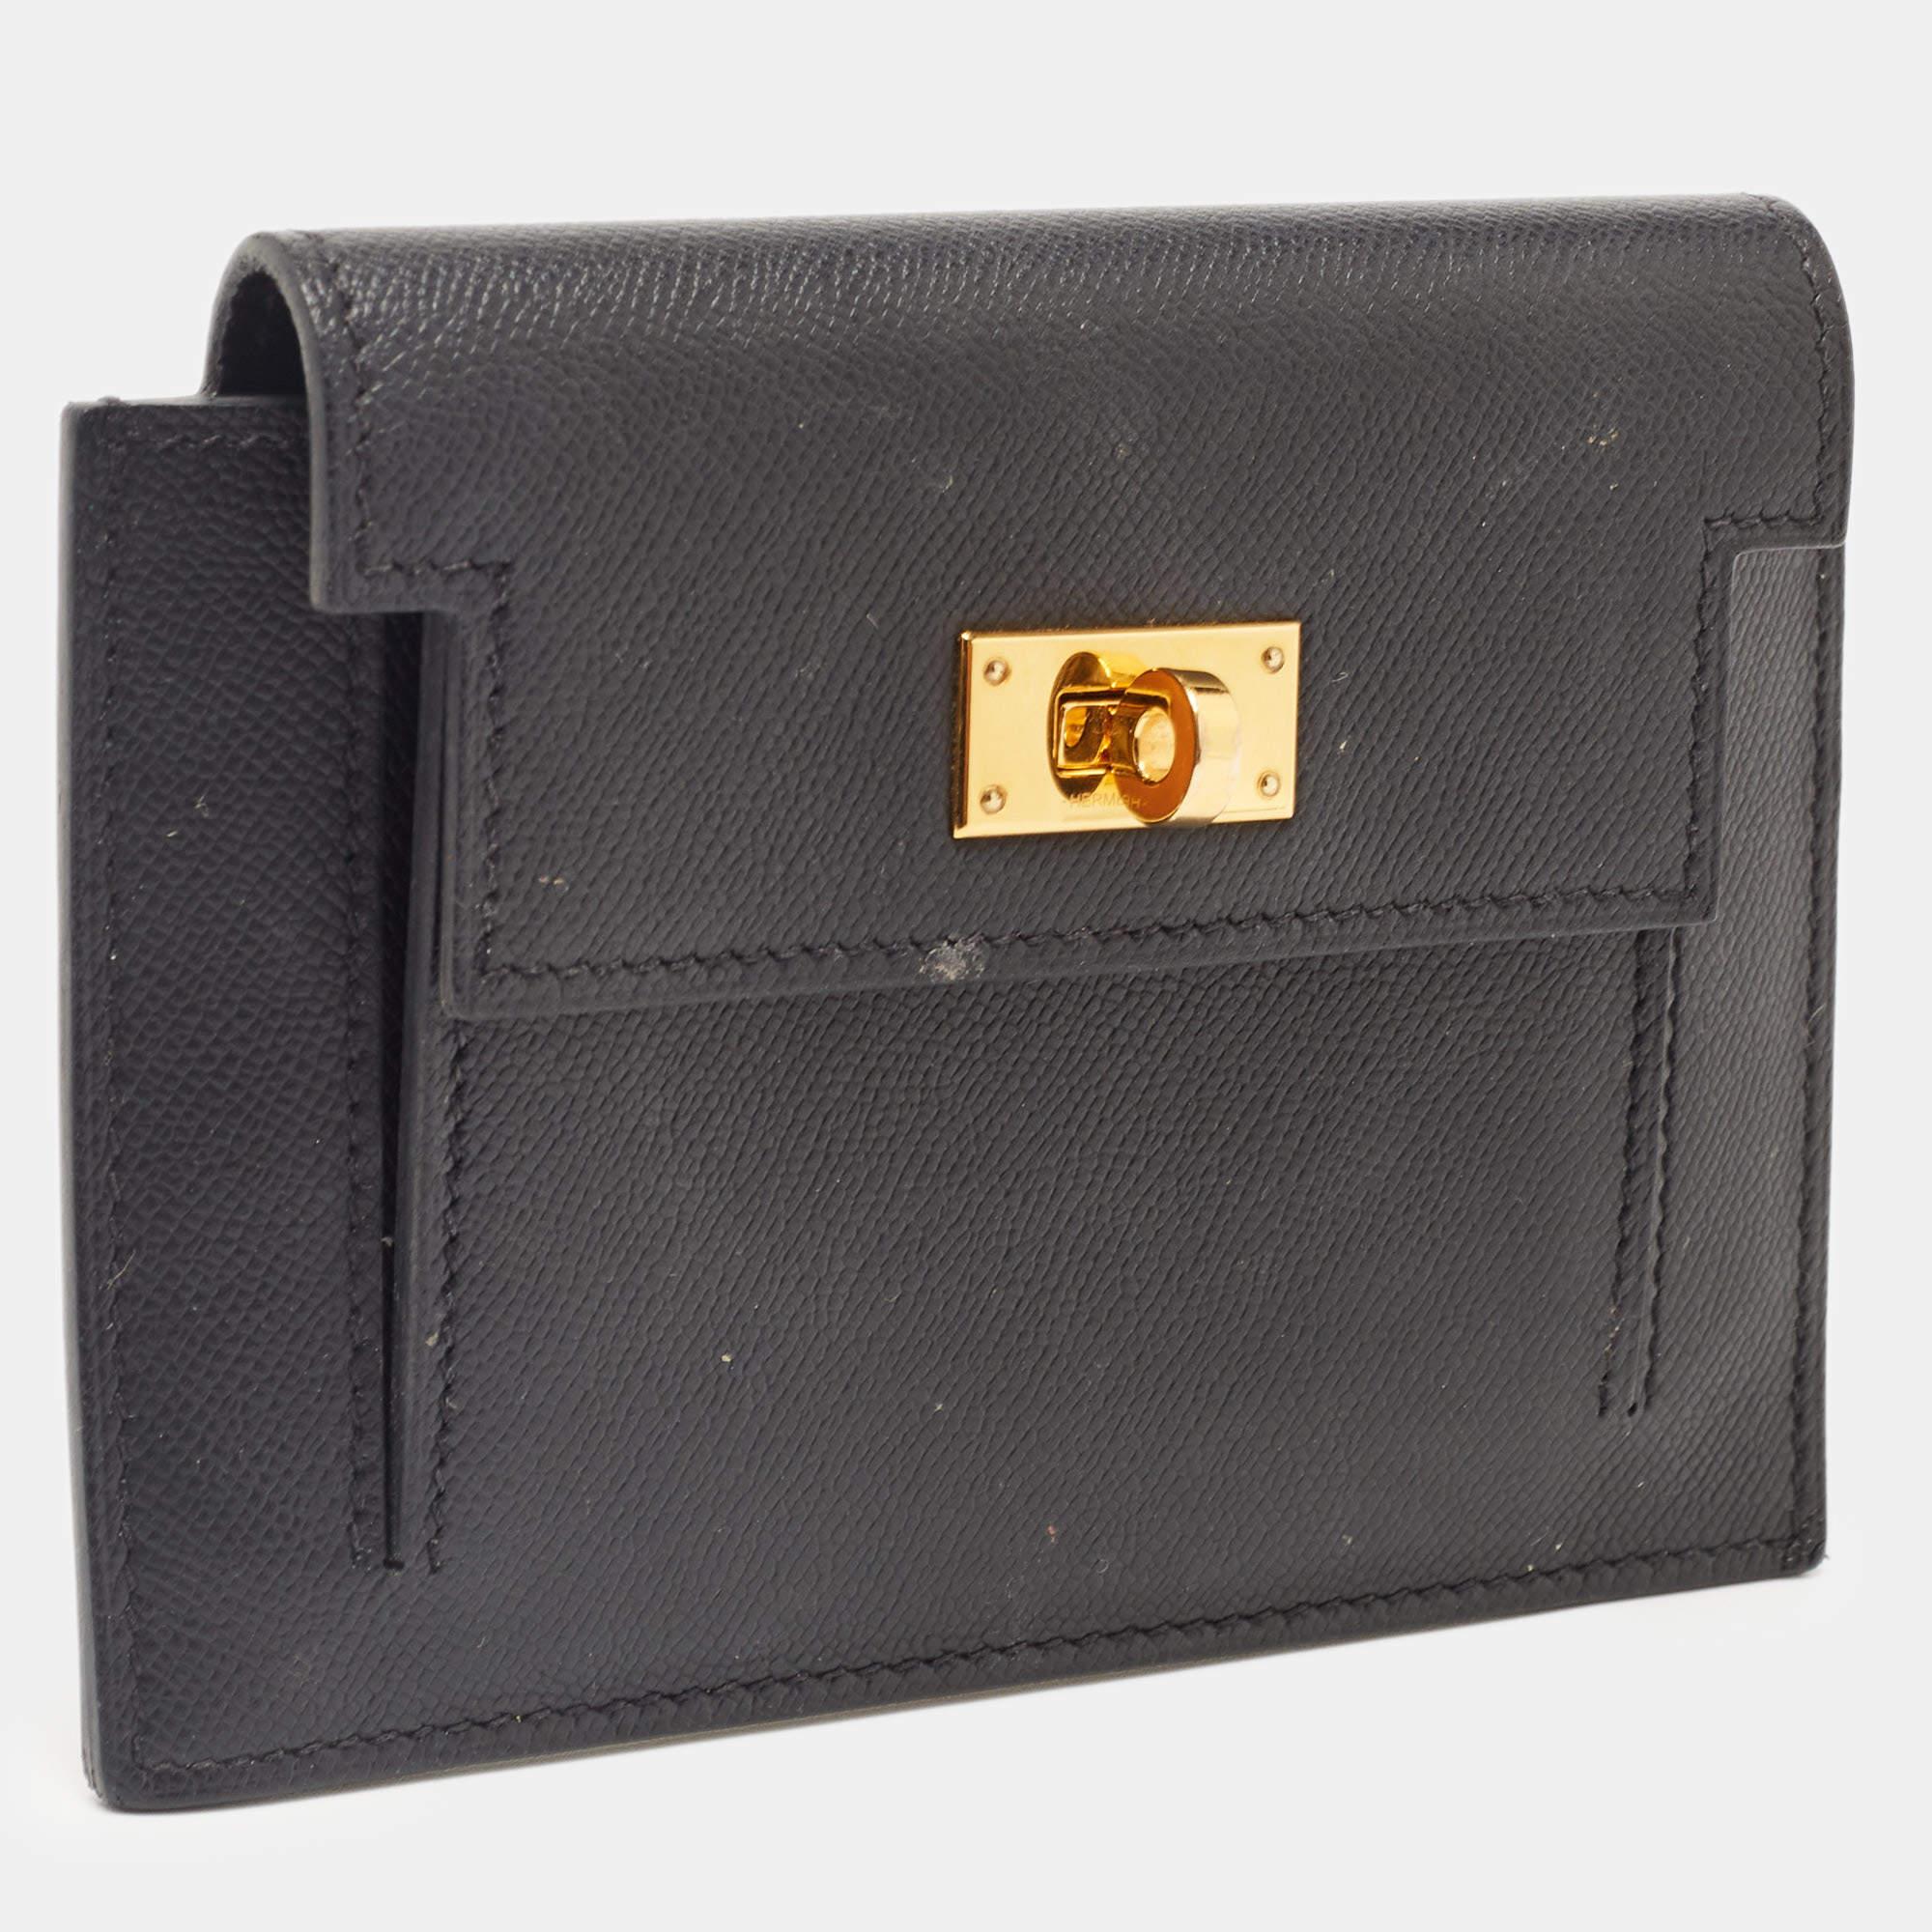 Hermes continues its history of delivering finely crafted accessories with this wallet. It has been crafted from Epsom leather in a compact shape and finished with a gold-tone lock.

Includes

Original BOX